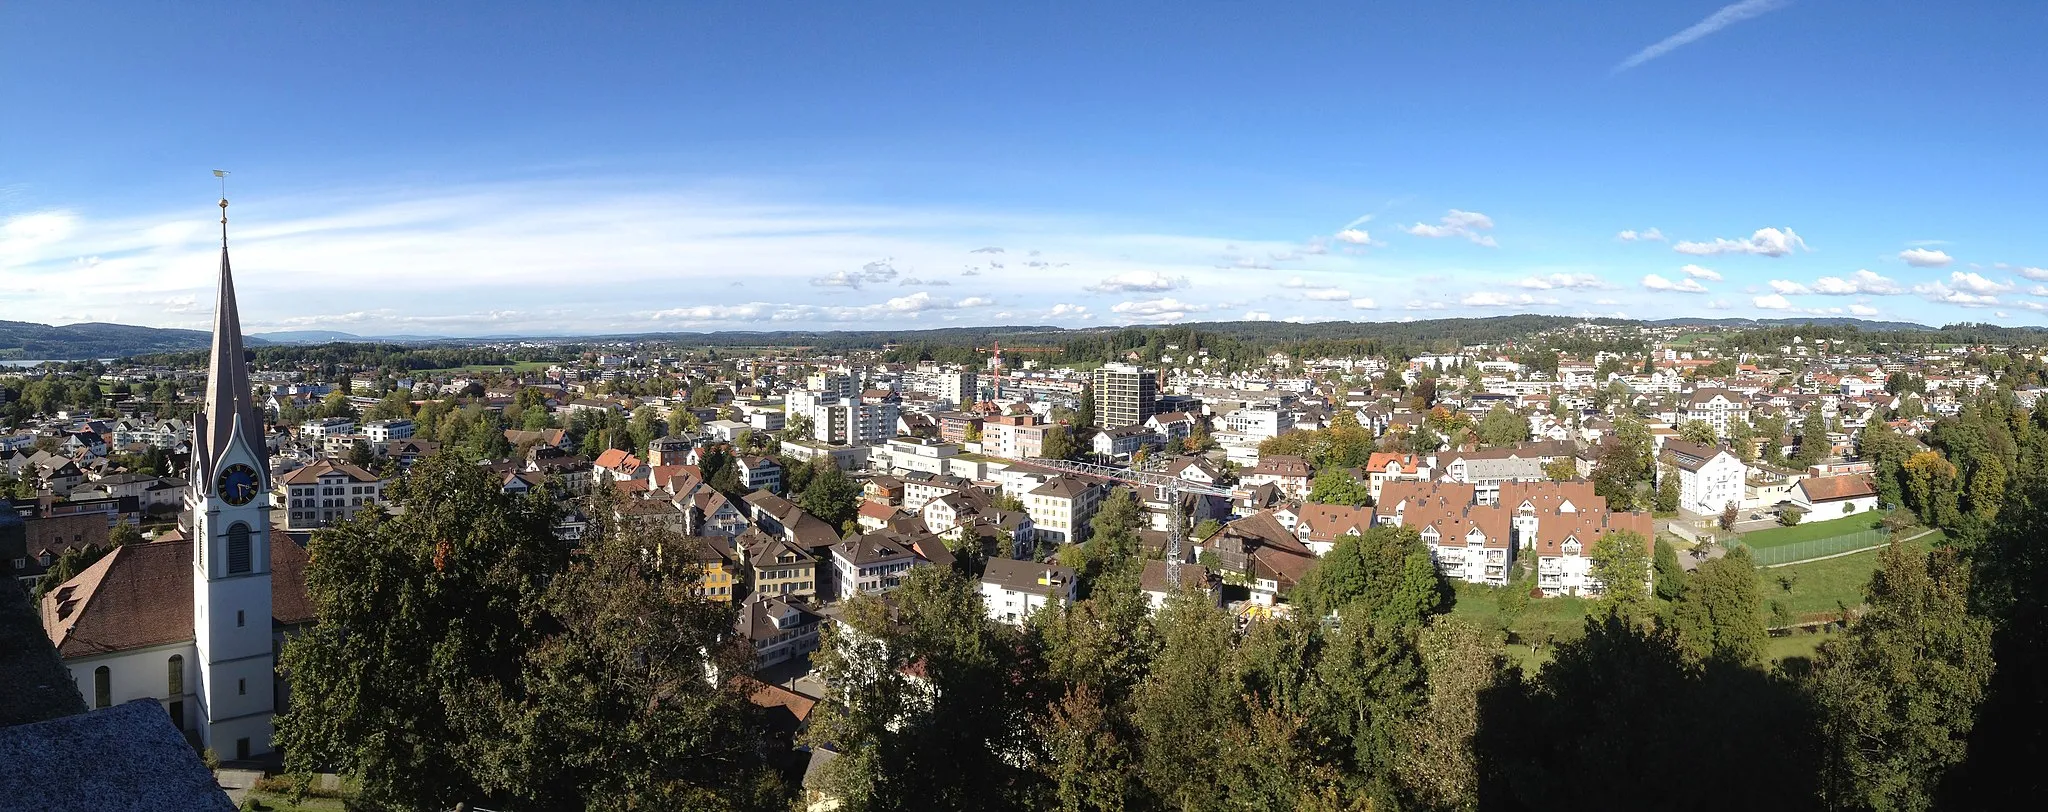 Image of Uster